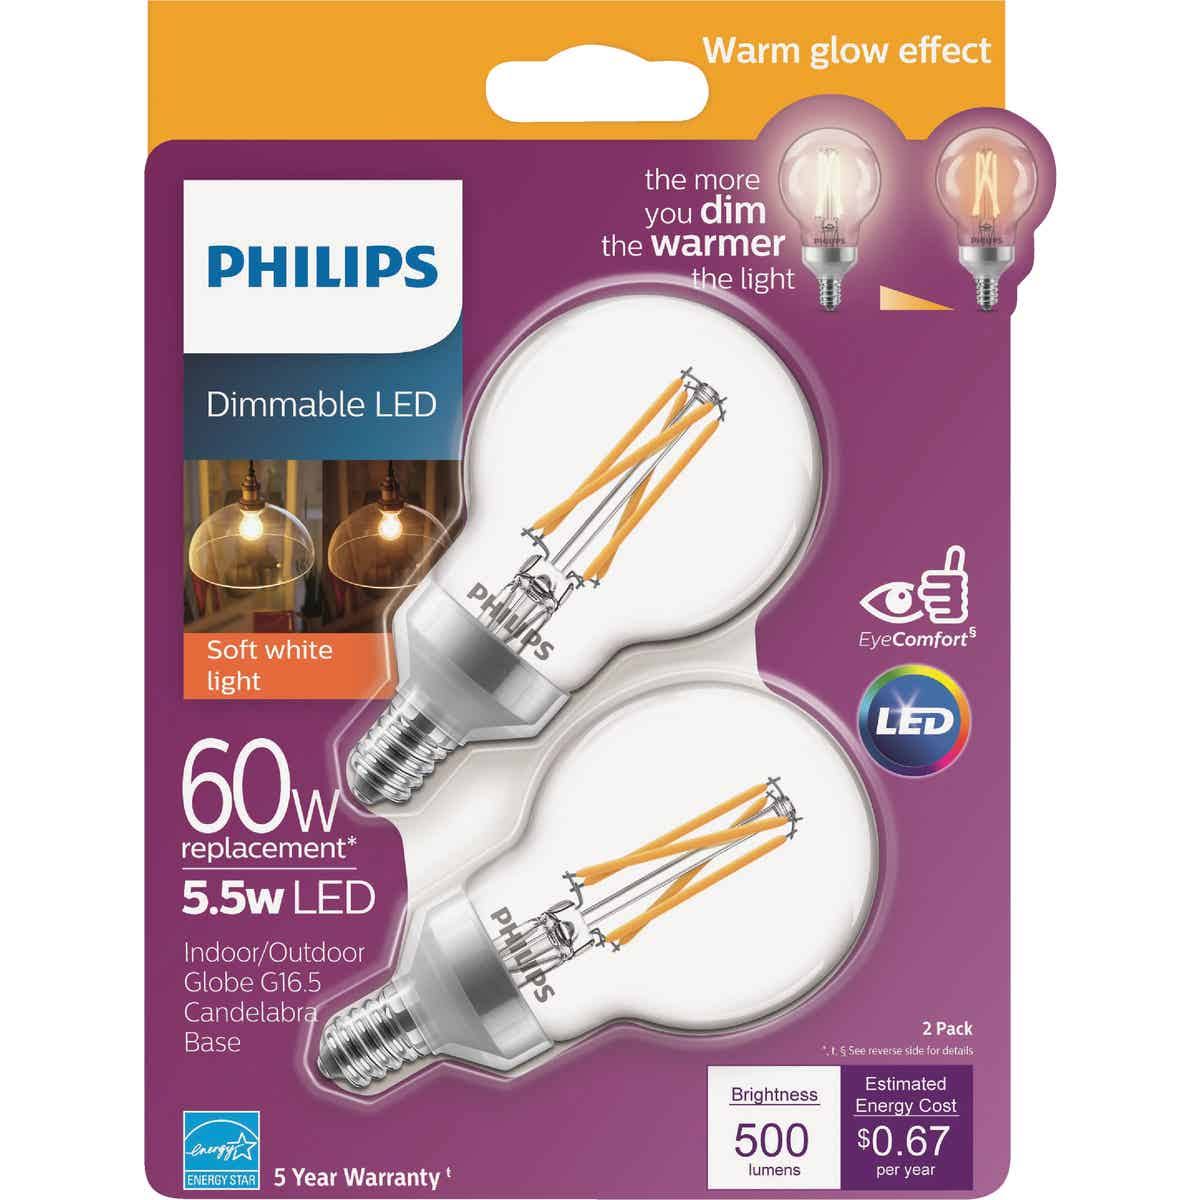 Philips 536755 Warm Glow G16.5 Candelabra Dimmable LED Decorative Light Bulb